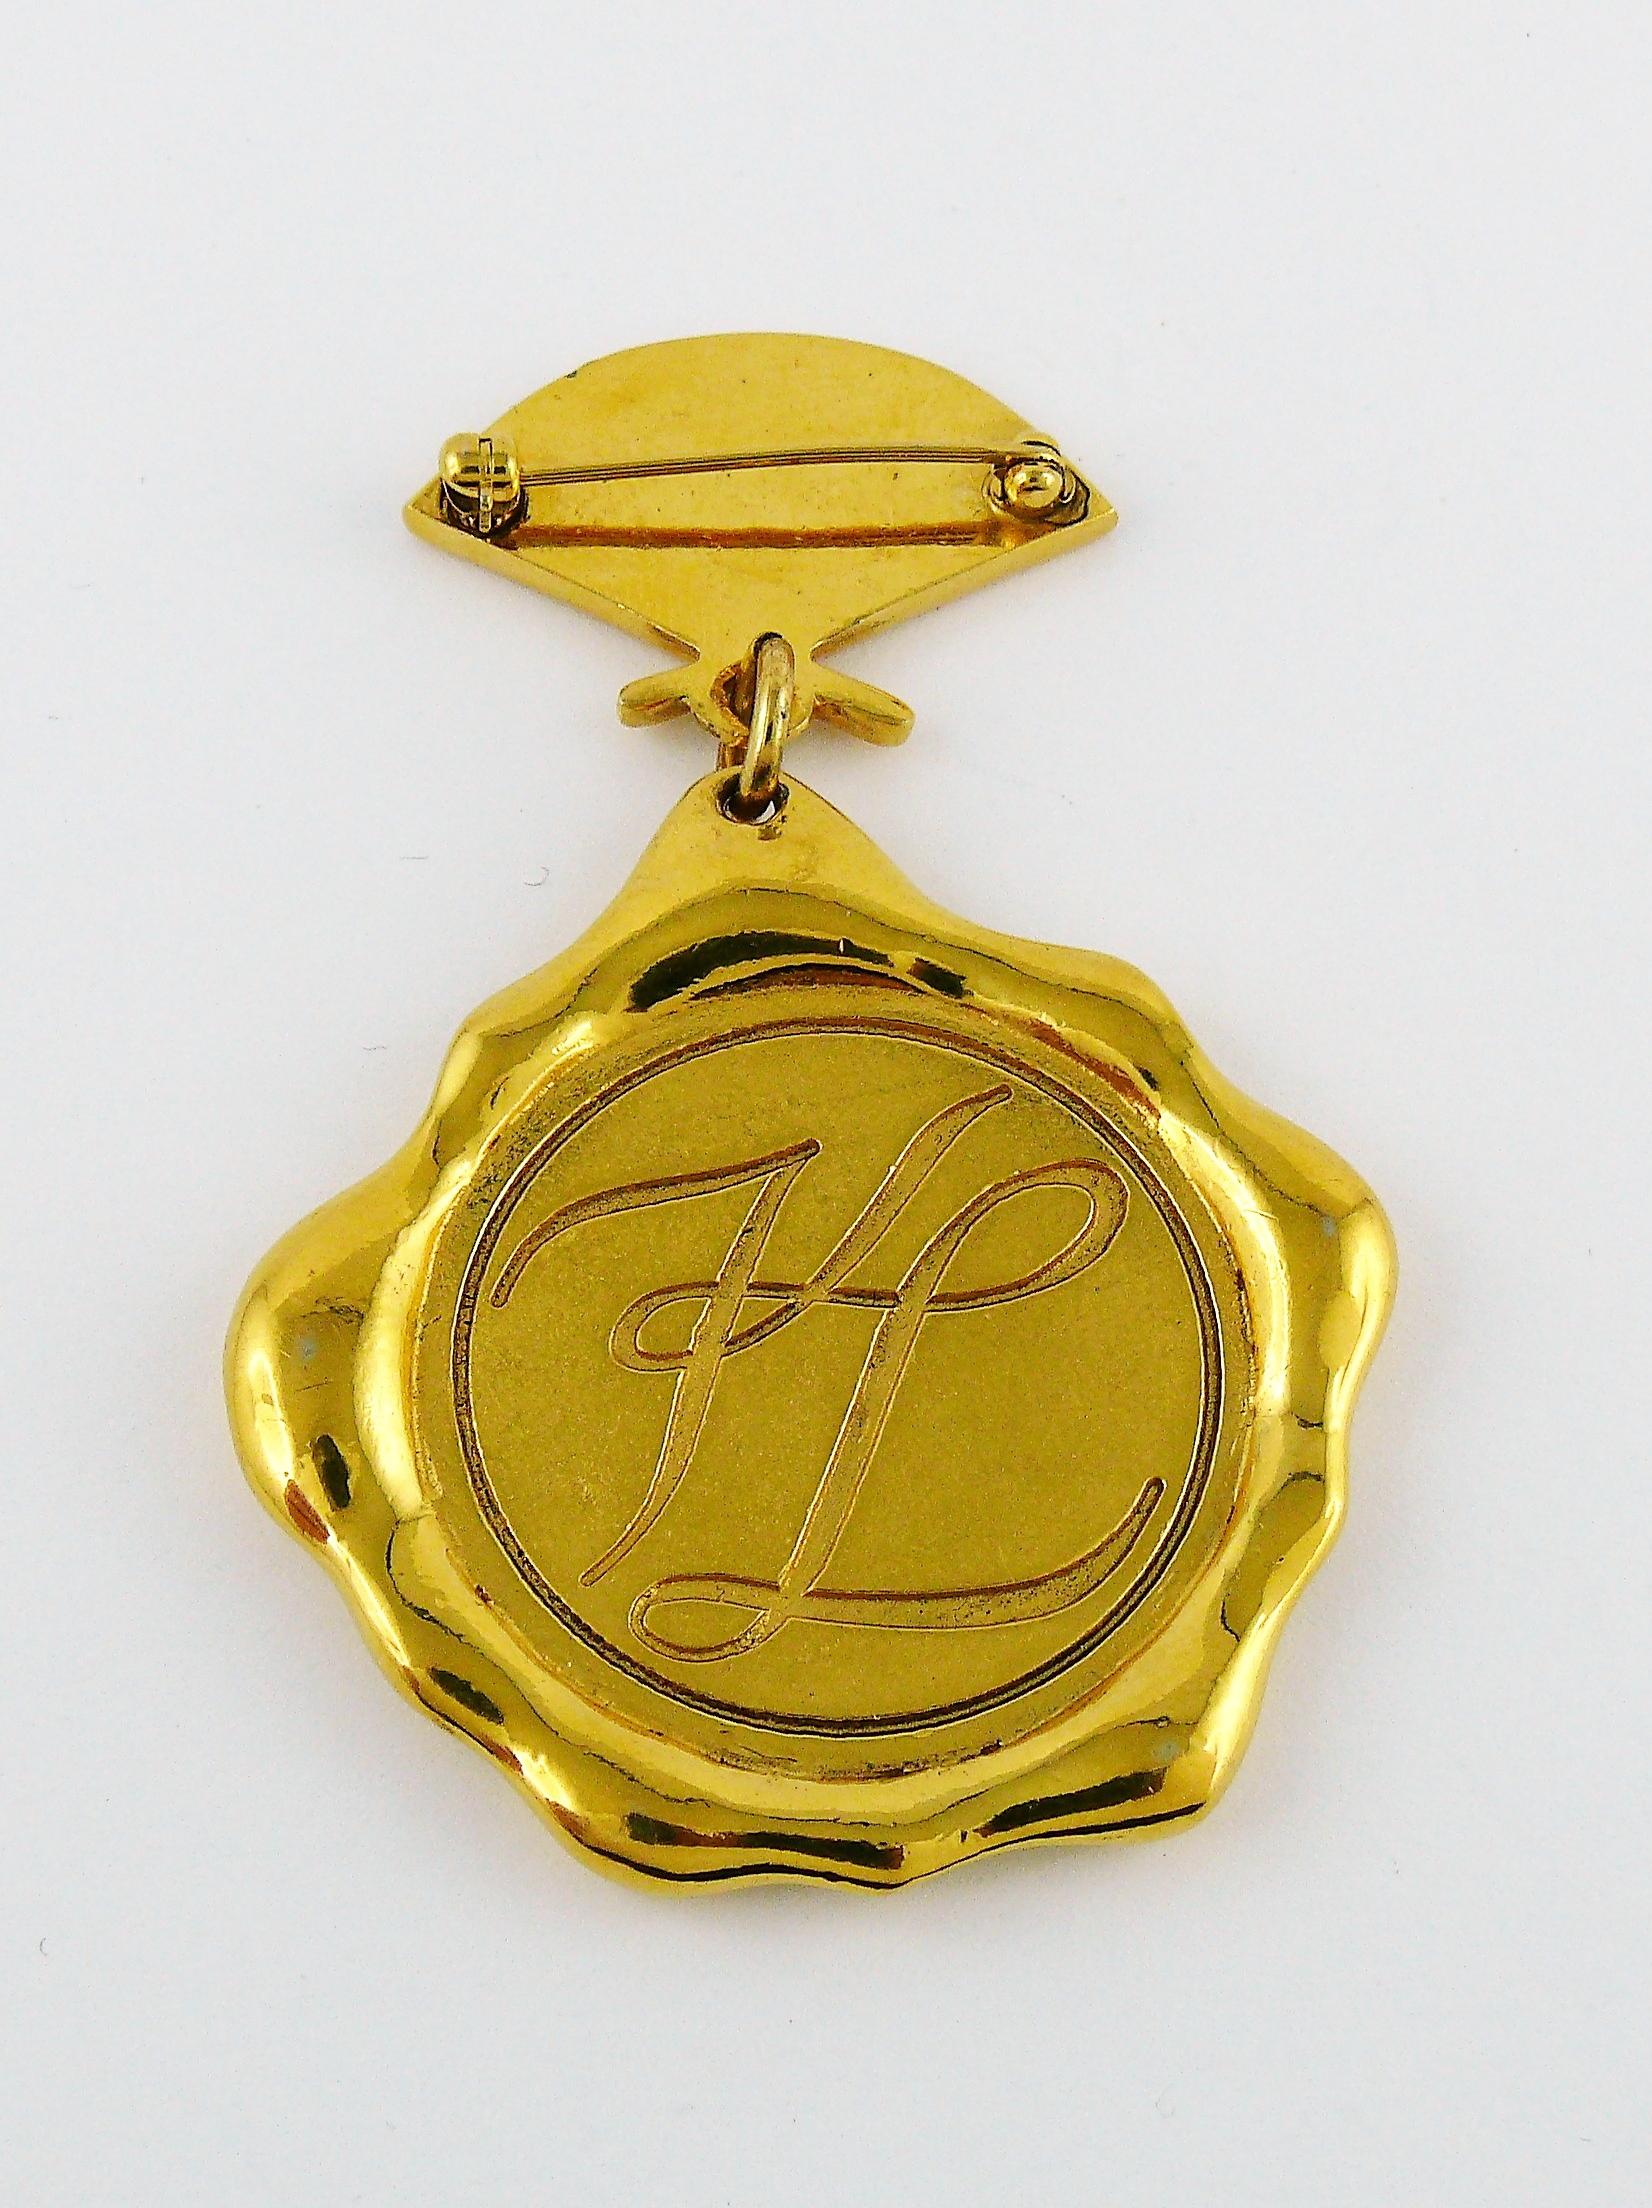 Karl Lagerfeld Vintage Massive Gold Toned Wax Seal and Fan Brooch For Sale 3